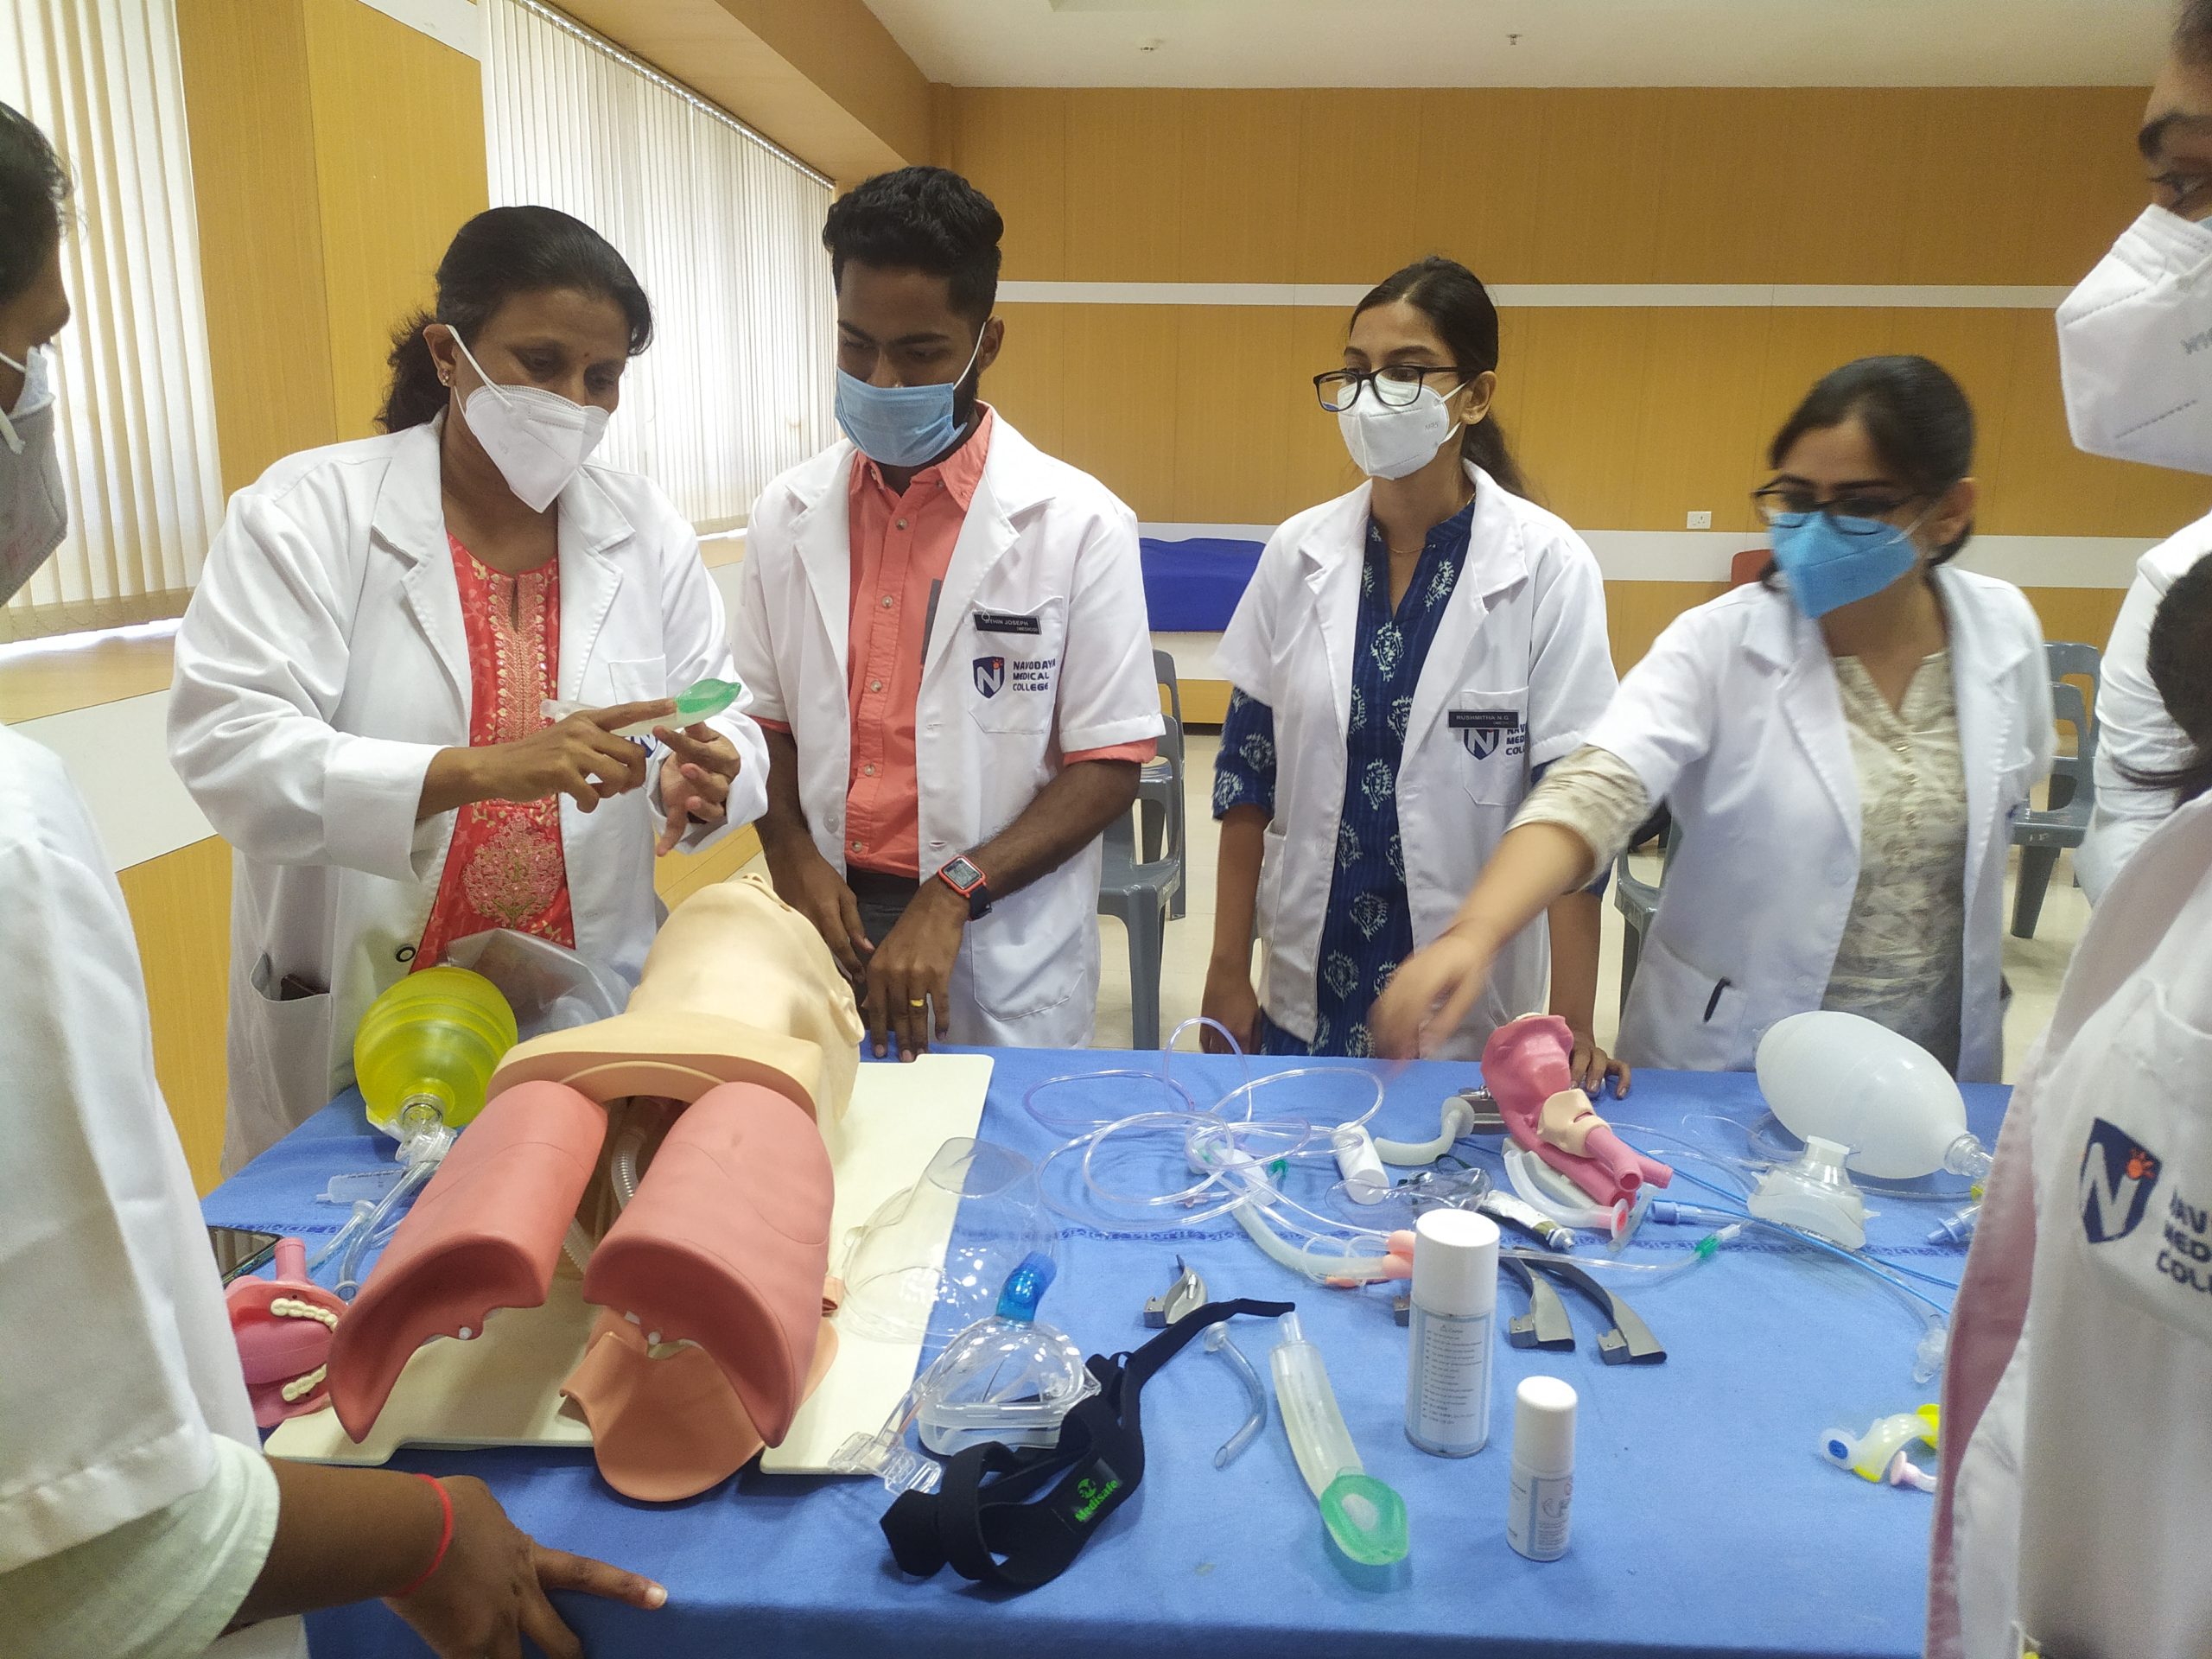 “Comprehensive Skill training in Basic Health Care Emergencies ” For Intern